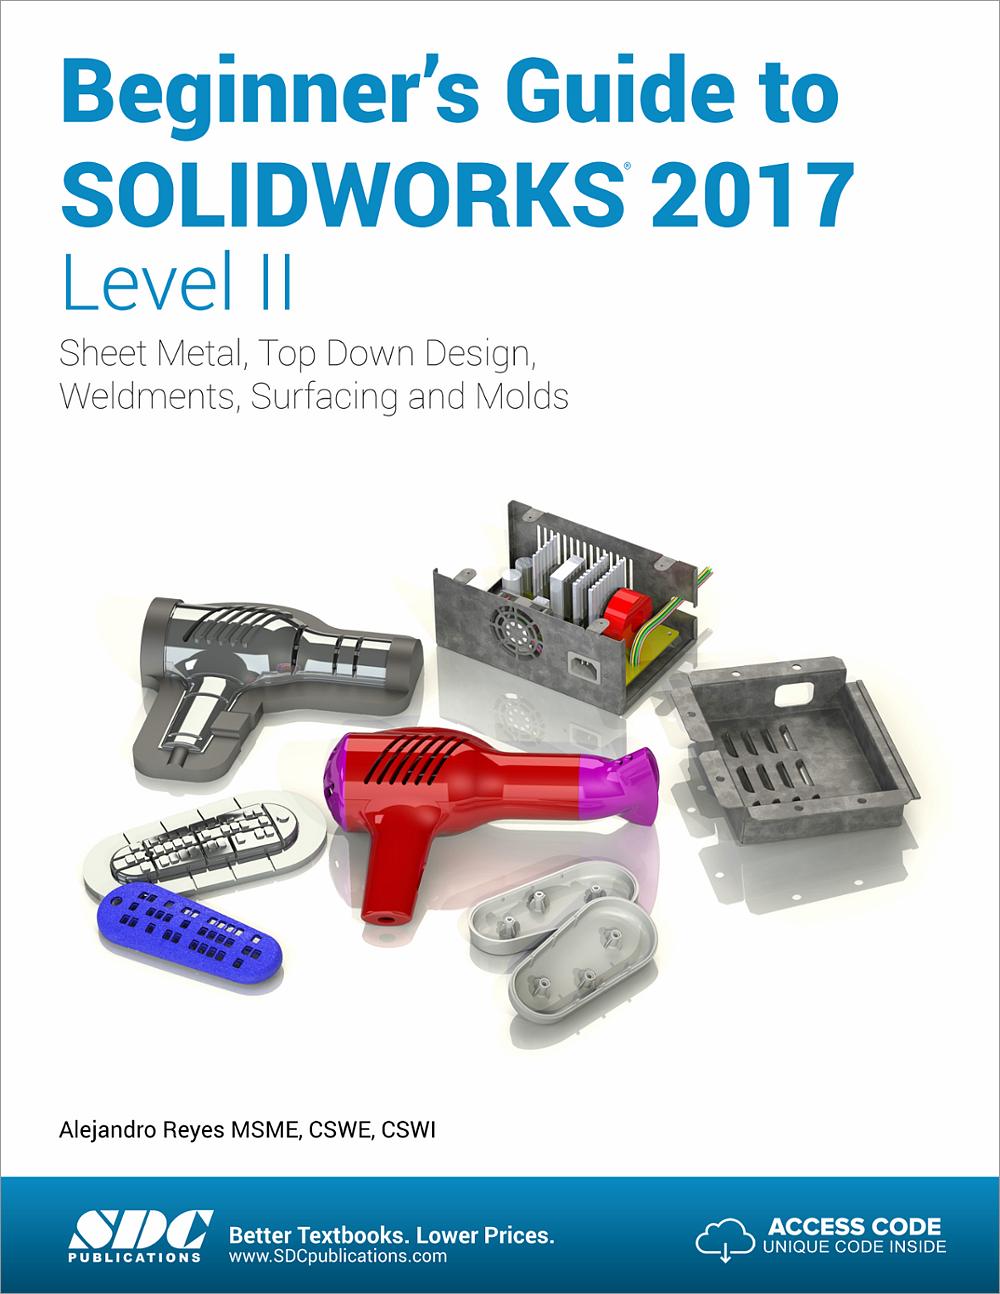 solidworks training manual download